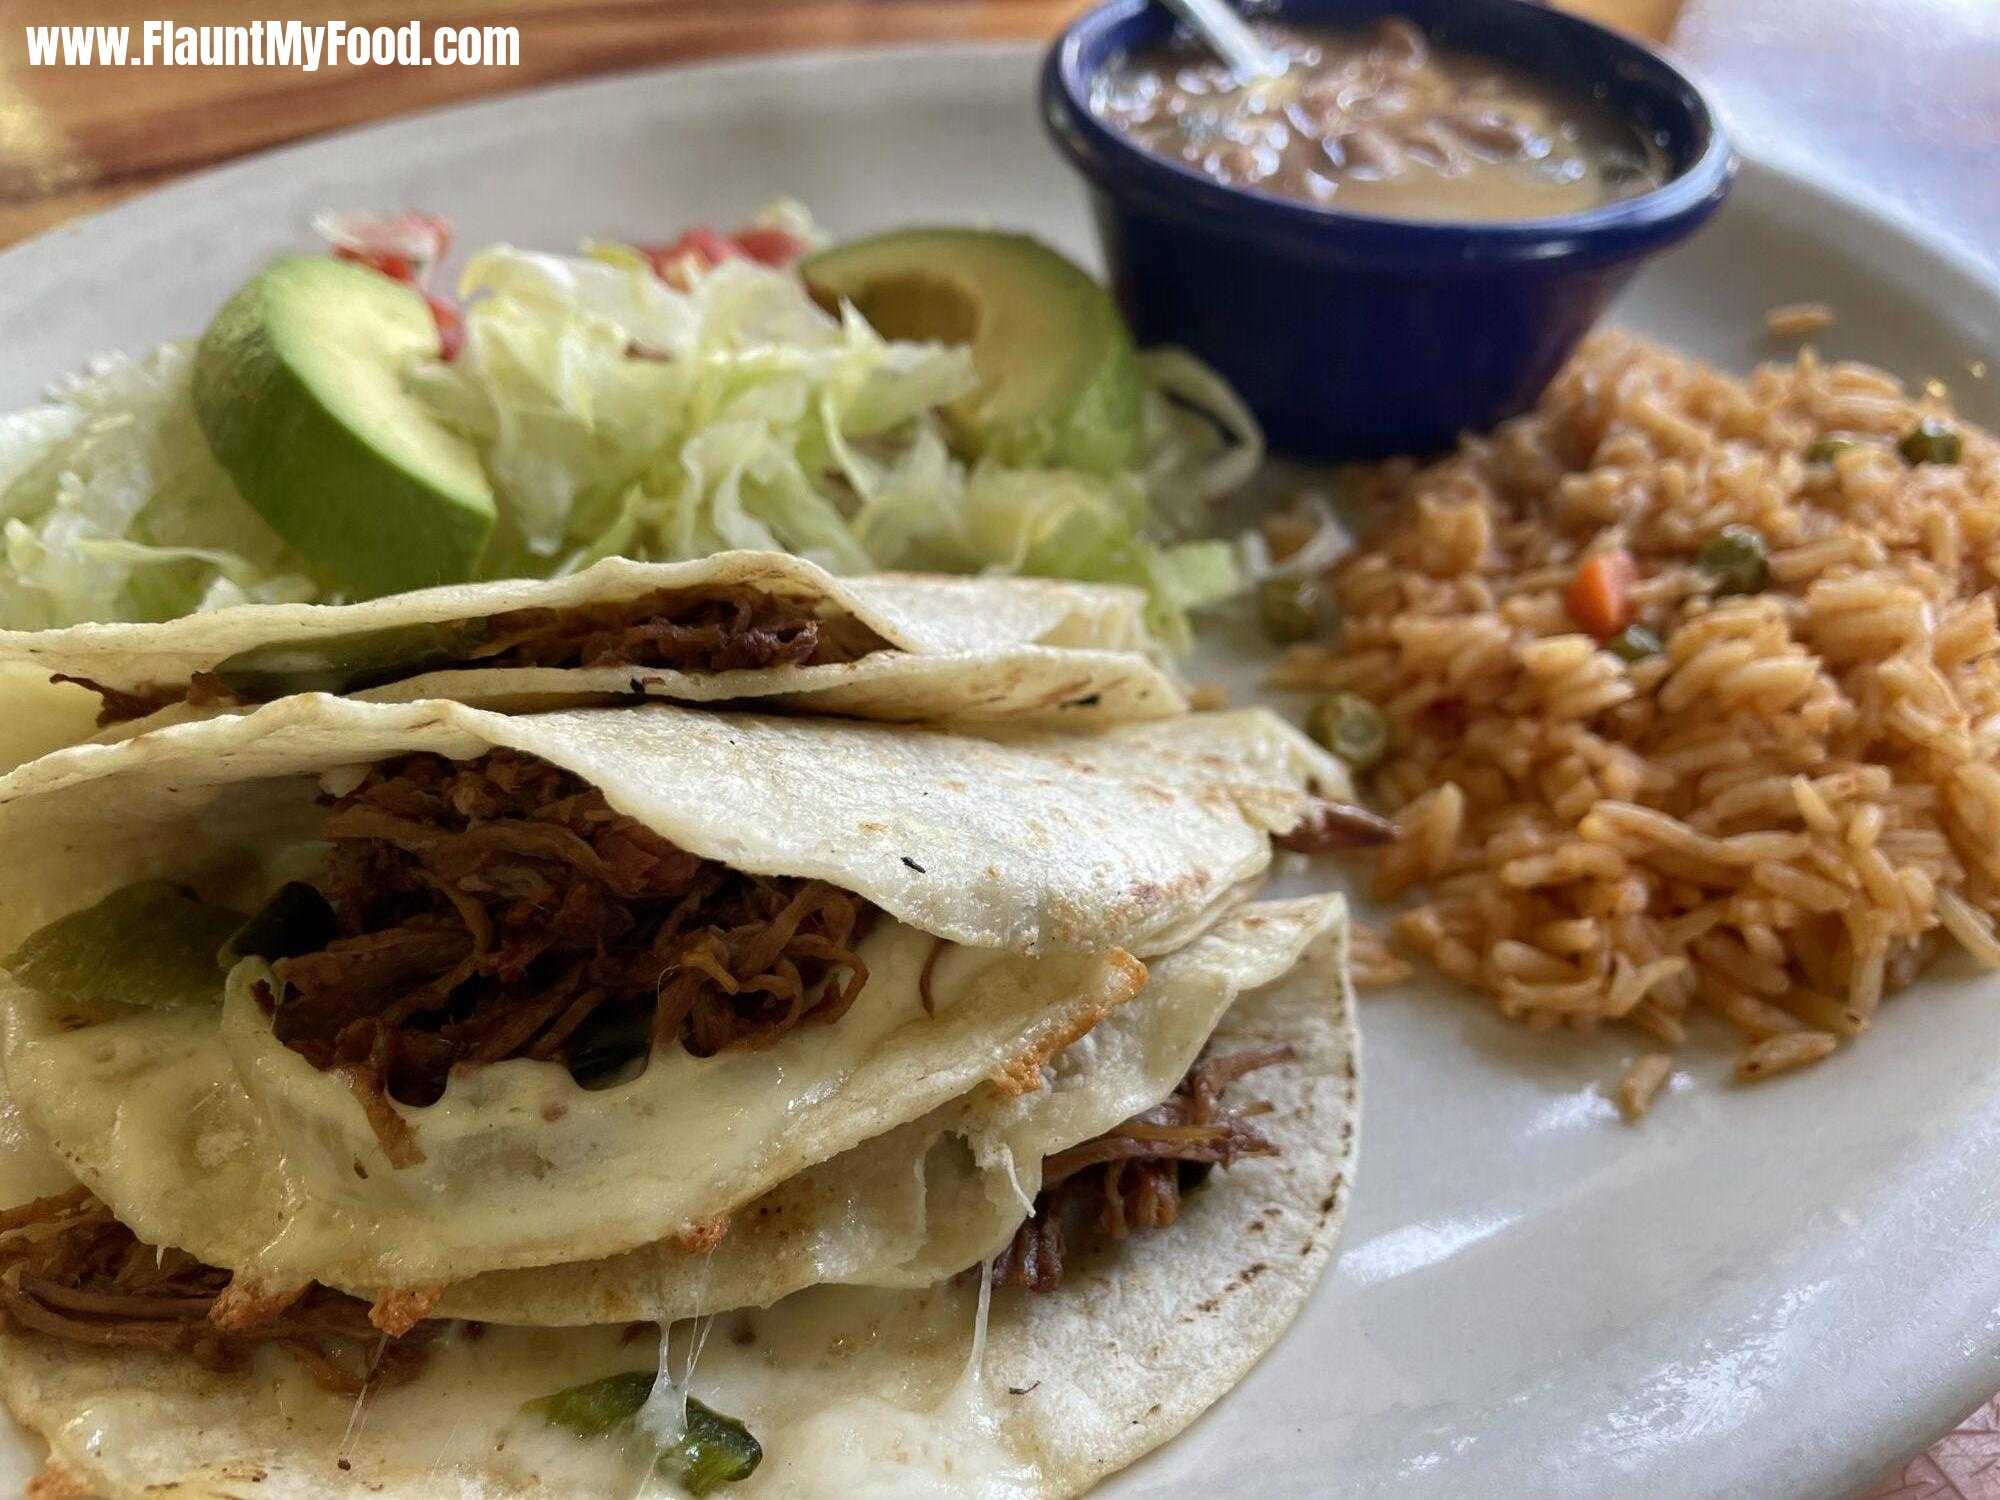 Brisket. Tacos with rice and avocado and beans with green salsa on the side at Esparza‘s in a grapevine, Texas.